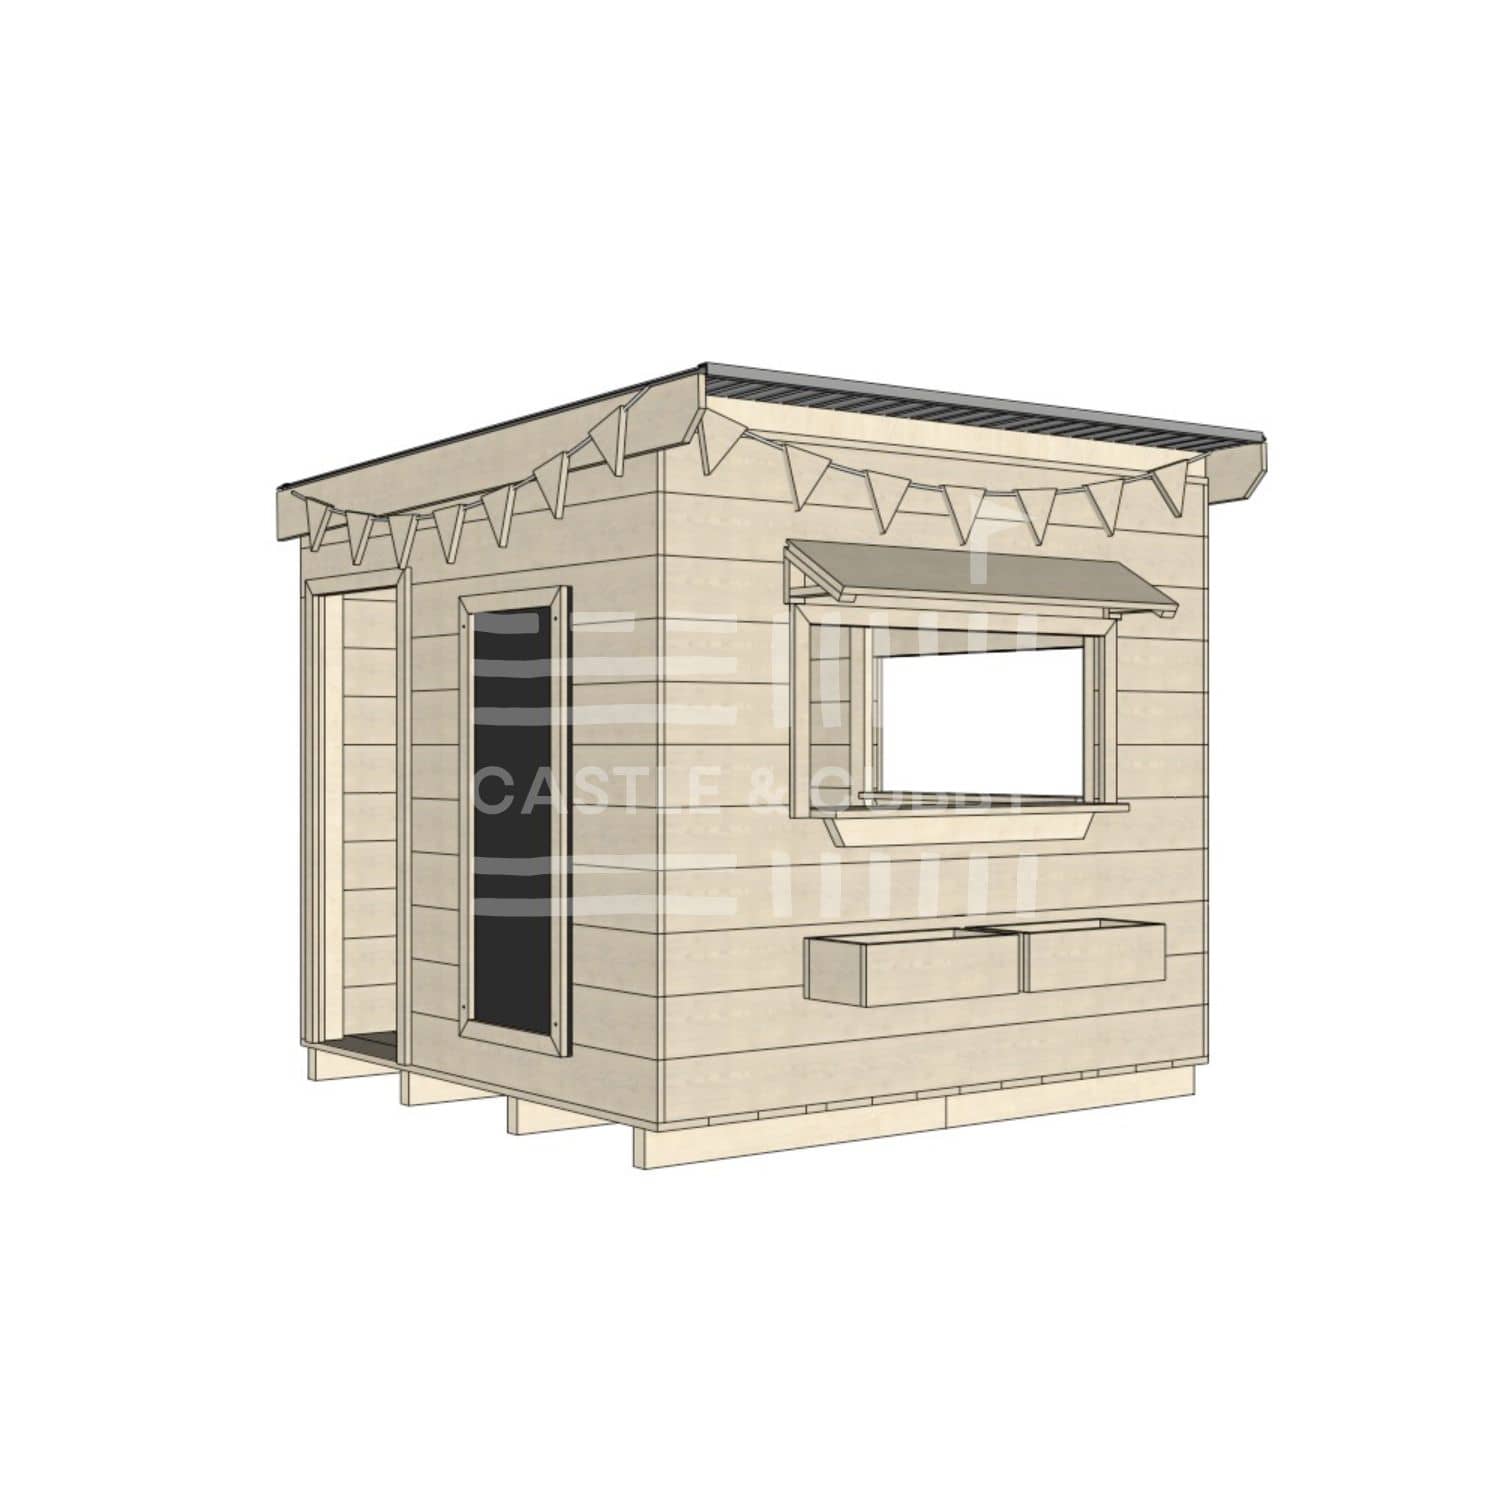 Flat roof raw wooden cubby house commercial education midi square accessories